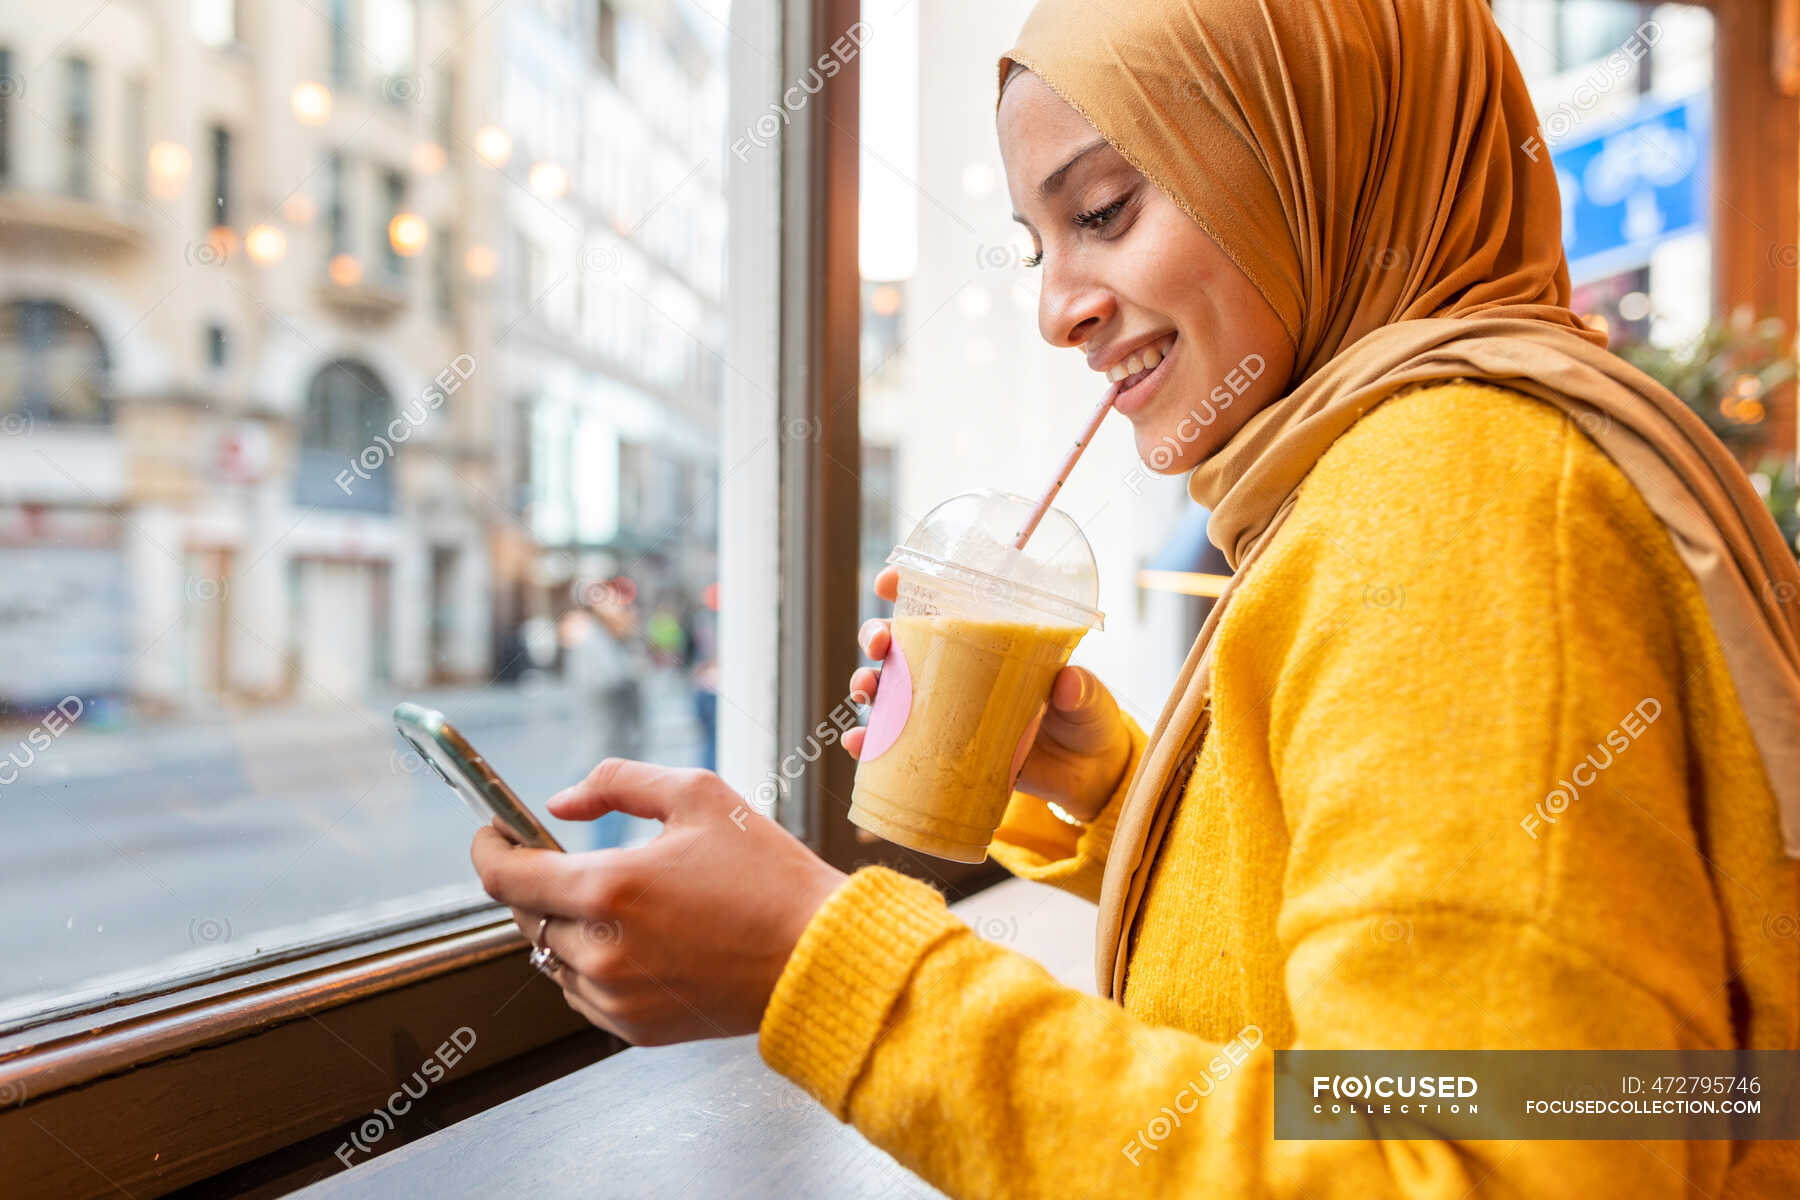 Portrait of happy young woman with smoothie and smartphone in a cafe —  muslim, Adults - Stock Photo | #472795746